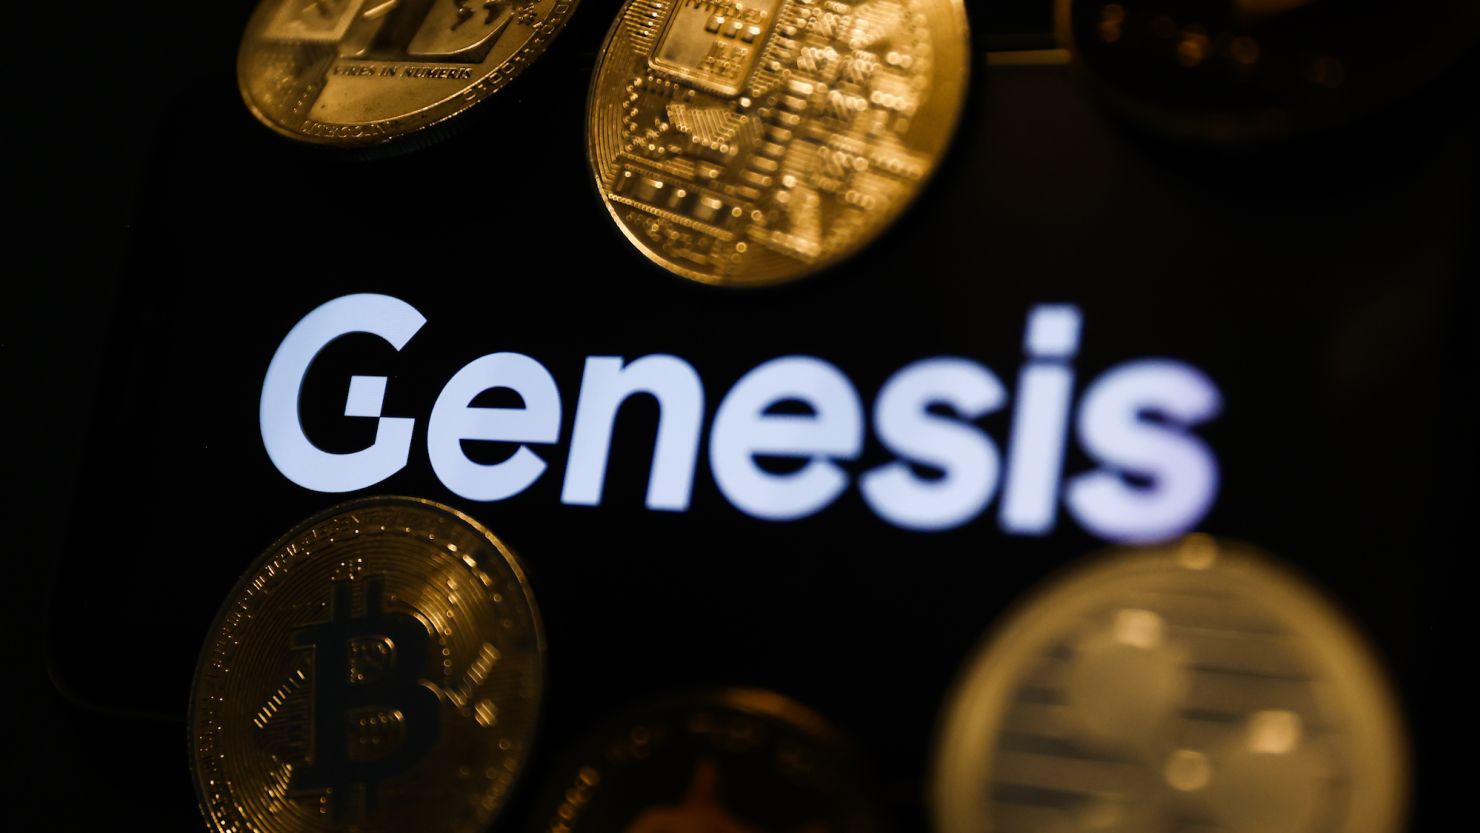 Genesis logo displayed on a phone screen and representation of cryptocurrencies are seen in this illustration photo taken in Krakow, Poland on December 1, 2022.